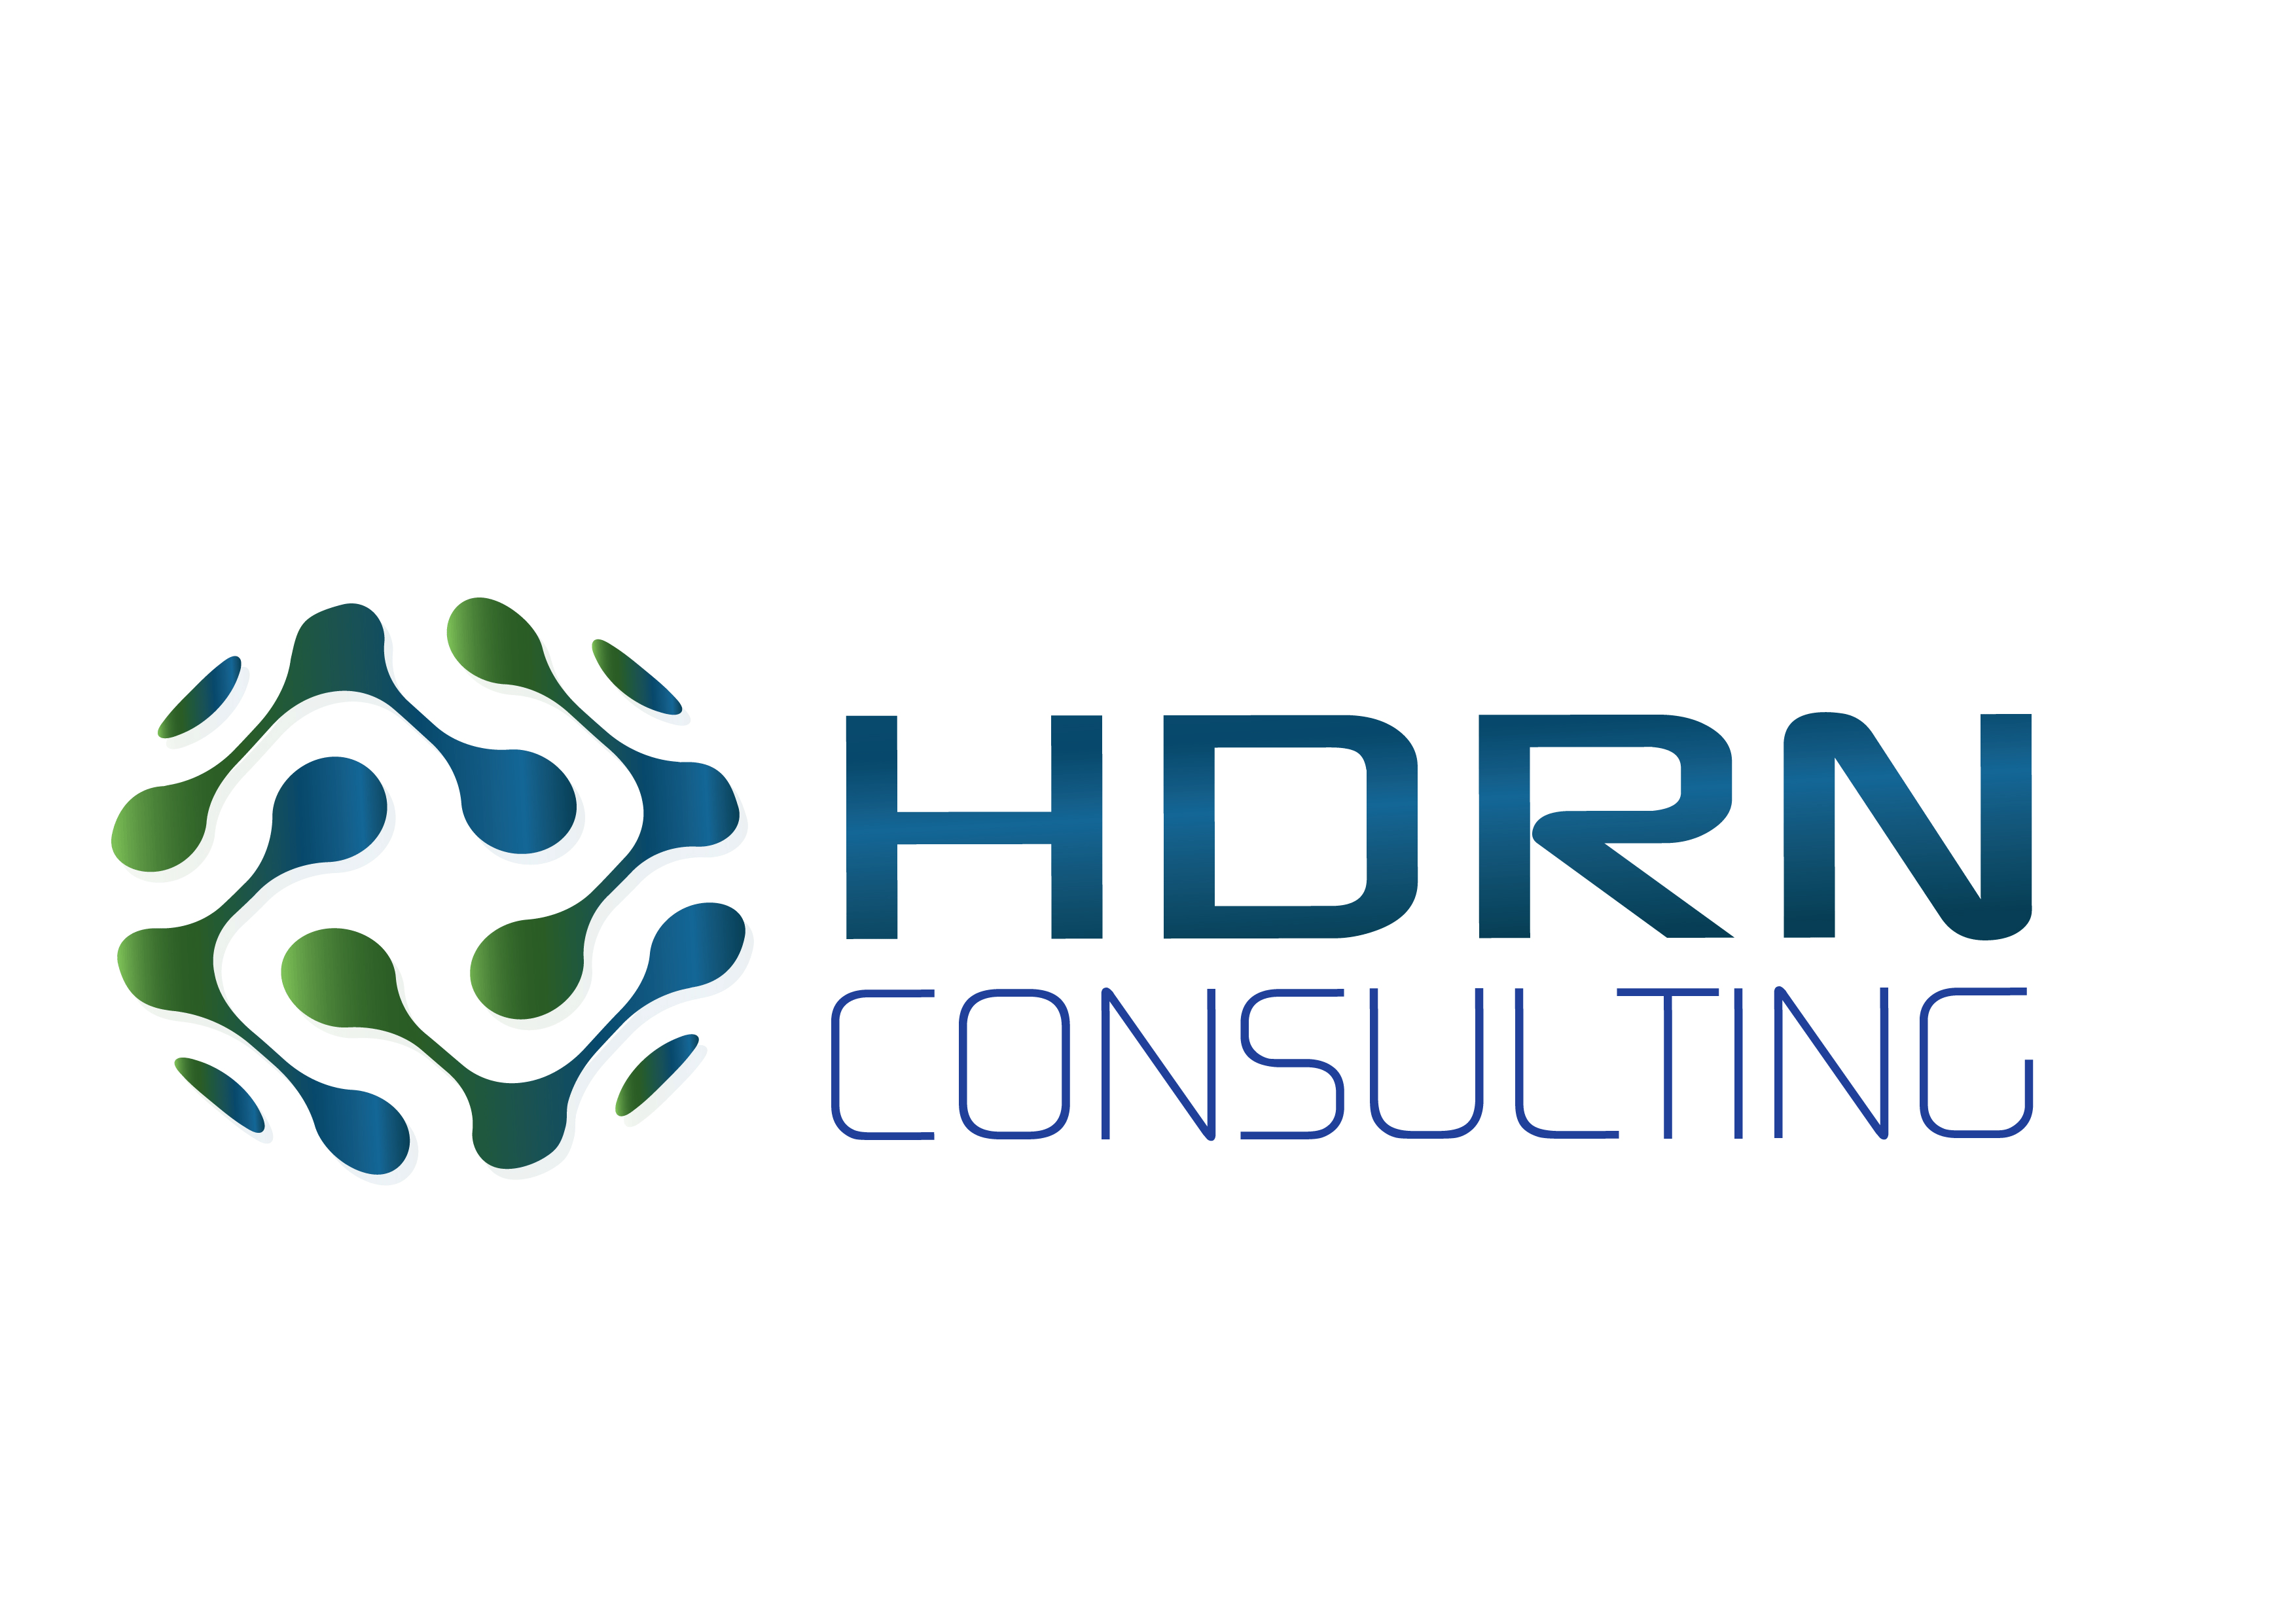 HDRN Consulting